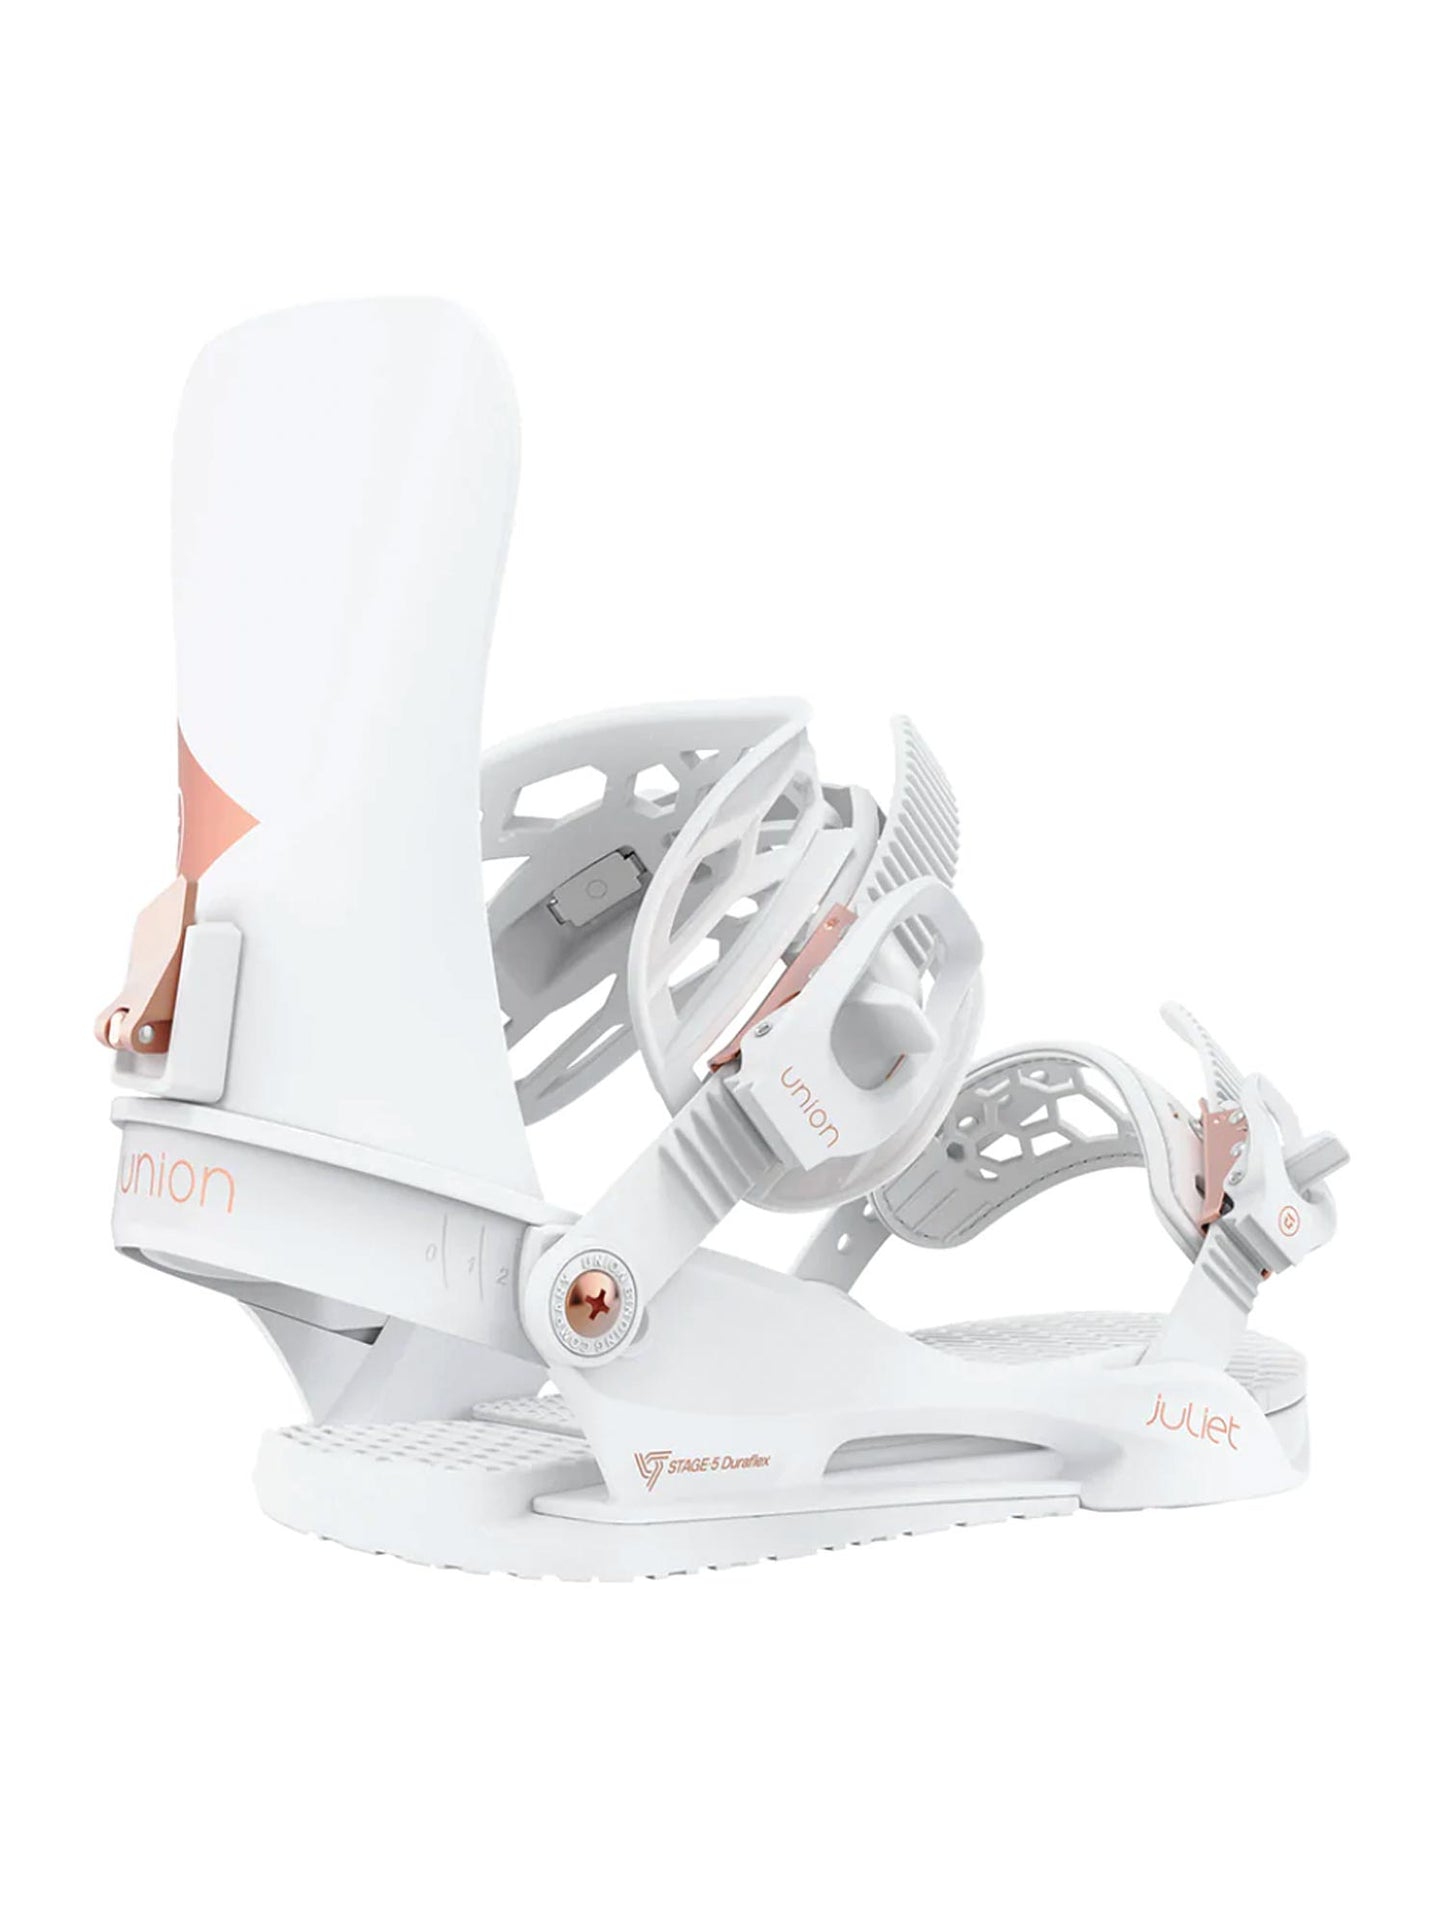 women's Union Force snowboard bindings, white with rose gold accents